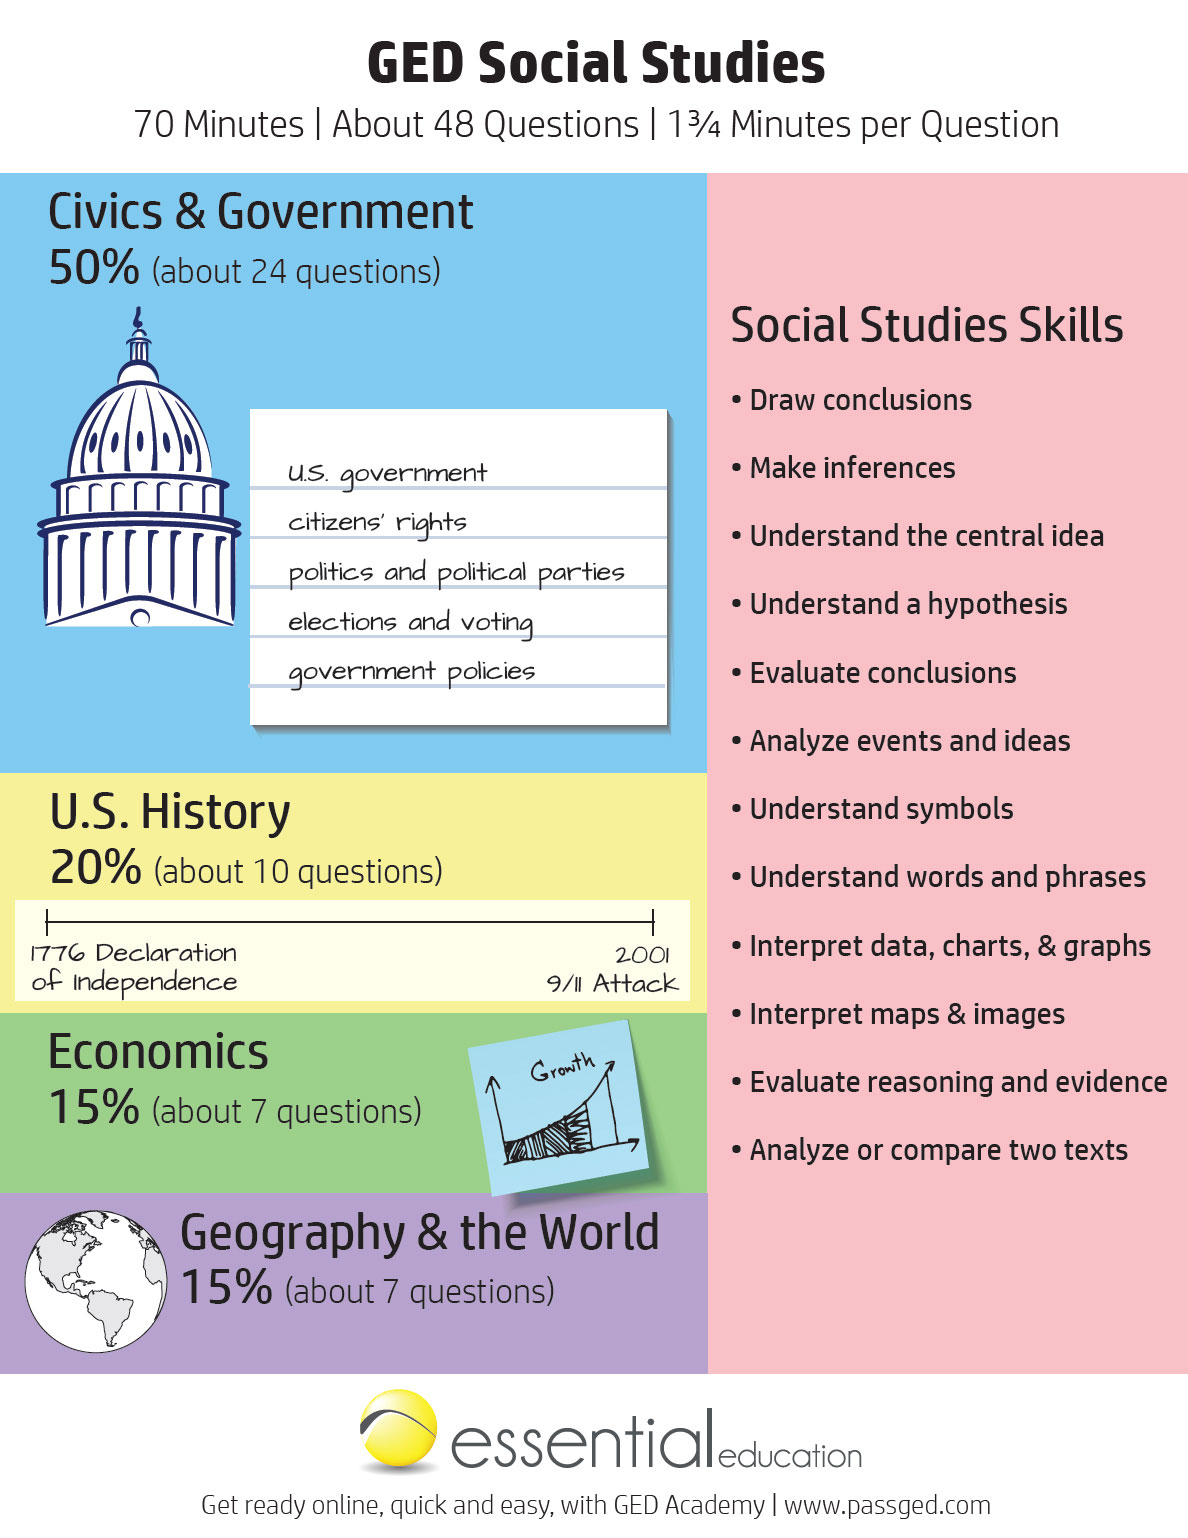 ged-social-studies-study-guide-2020-ged-academy